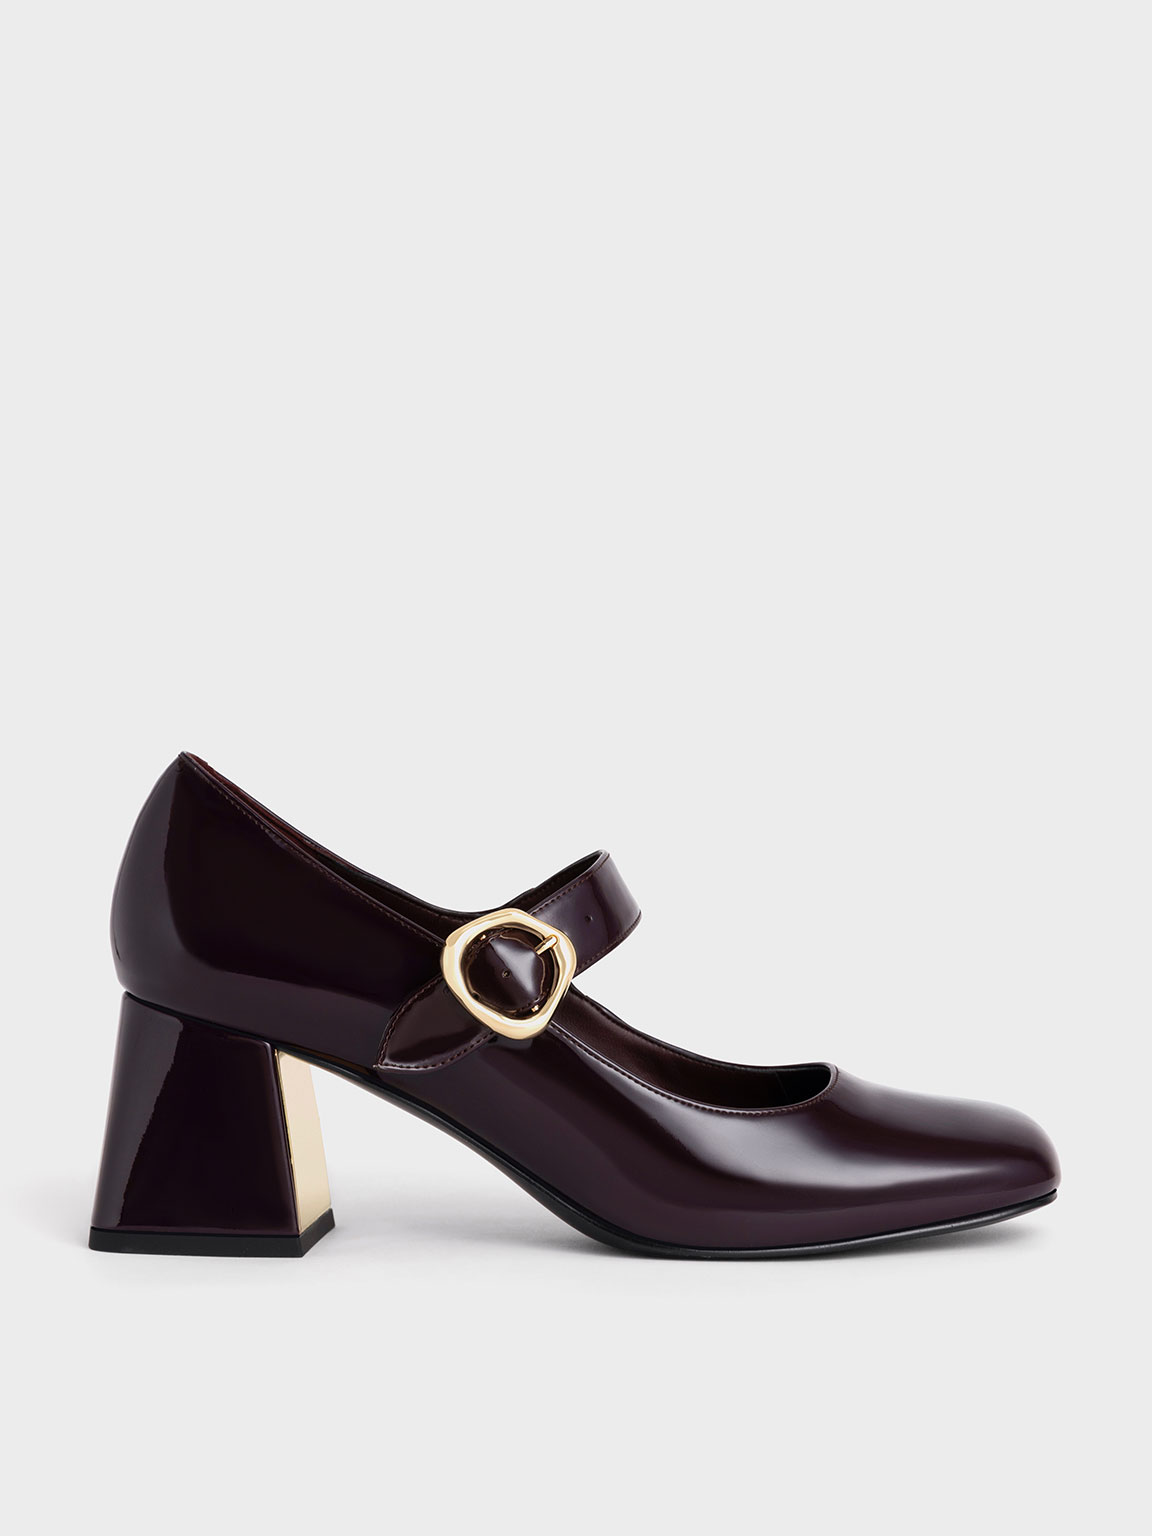 Maroon Patent Buckled Mary Jane Pumps - CHARLES & KEITH UK